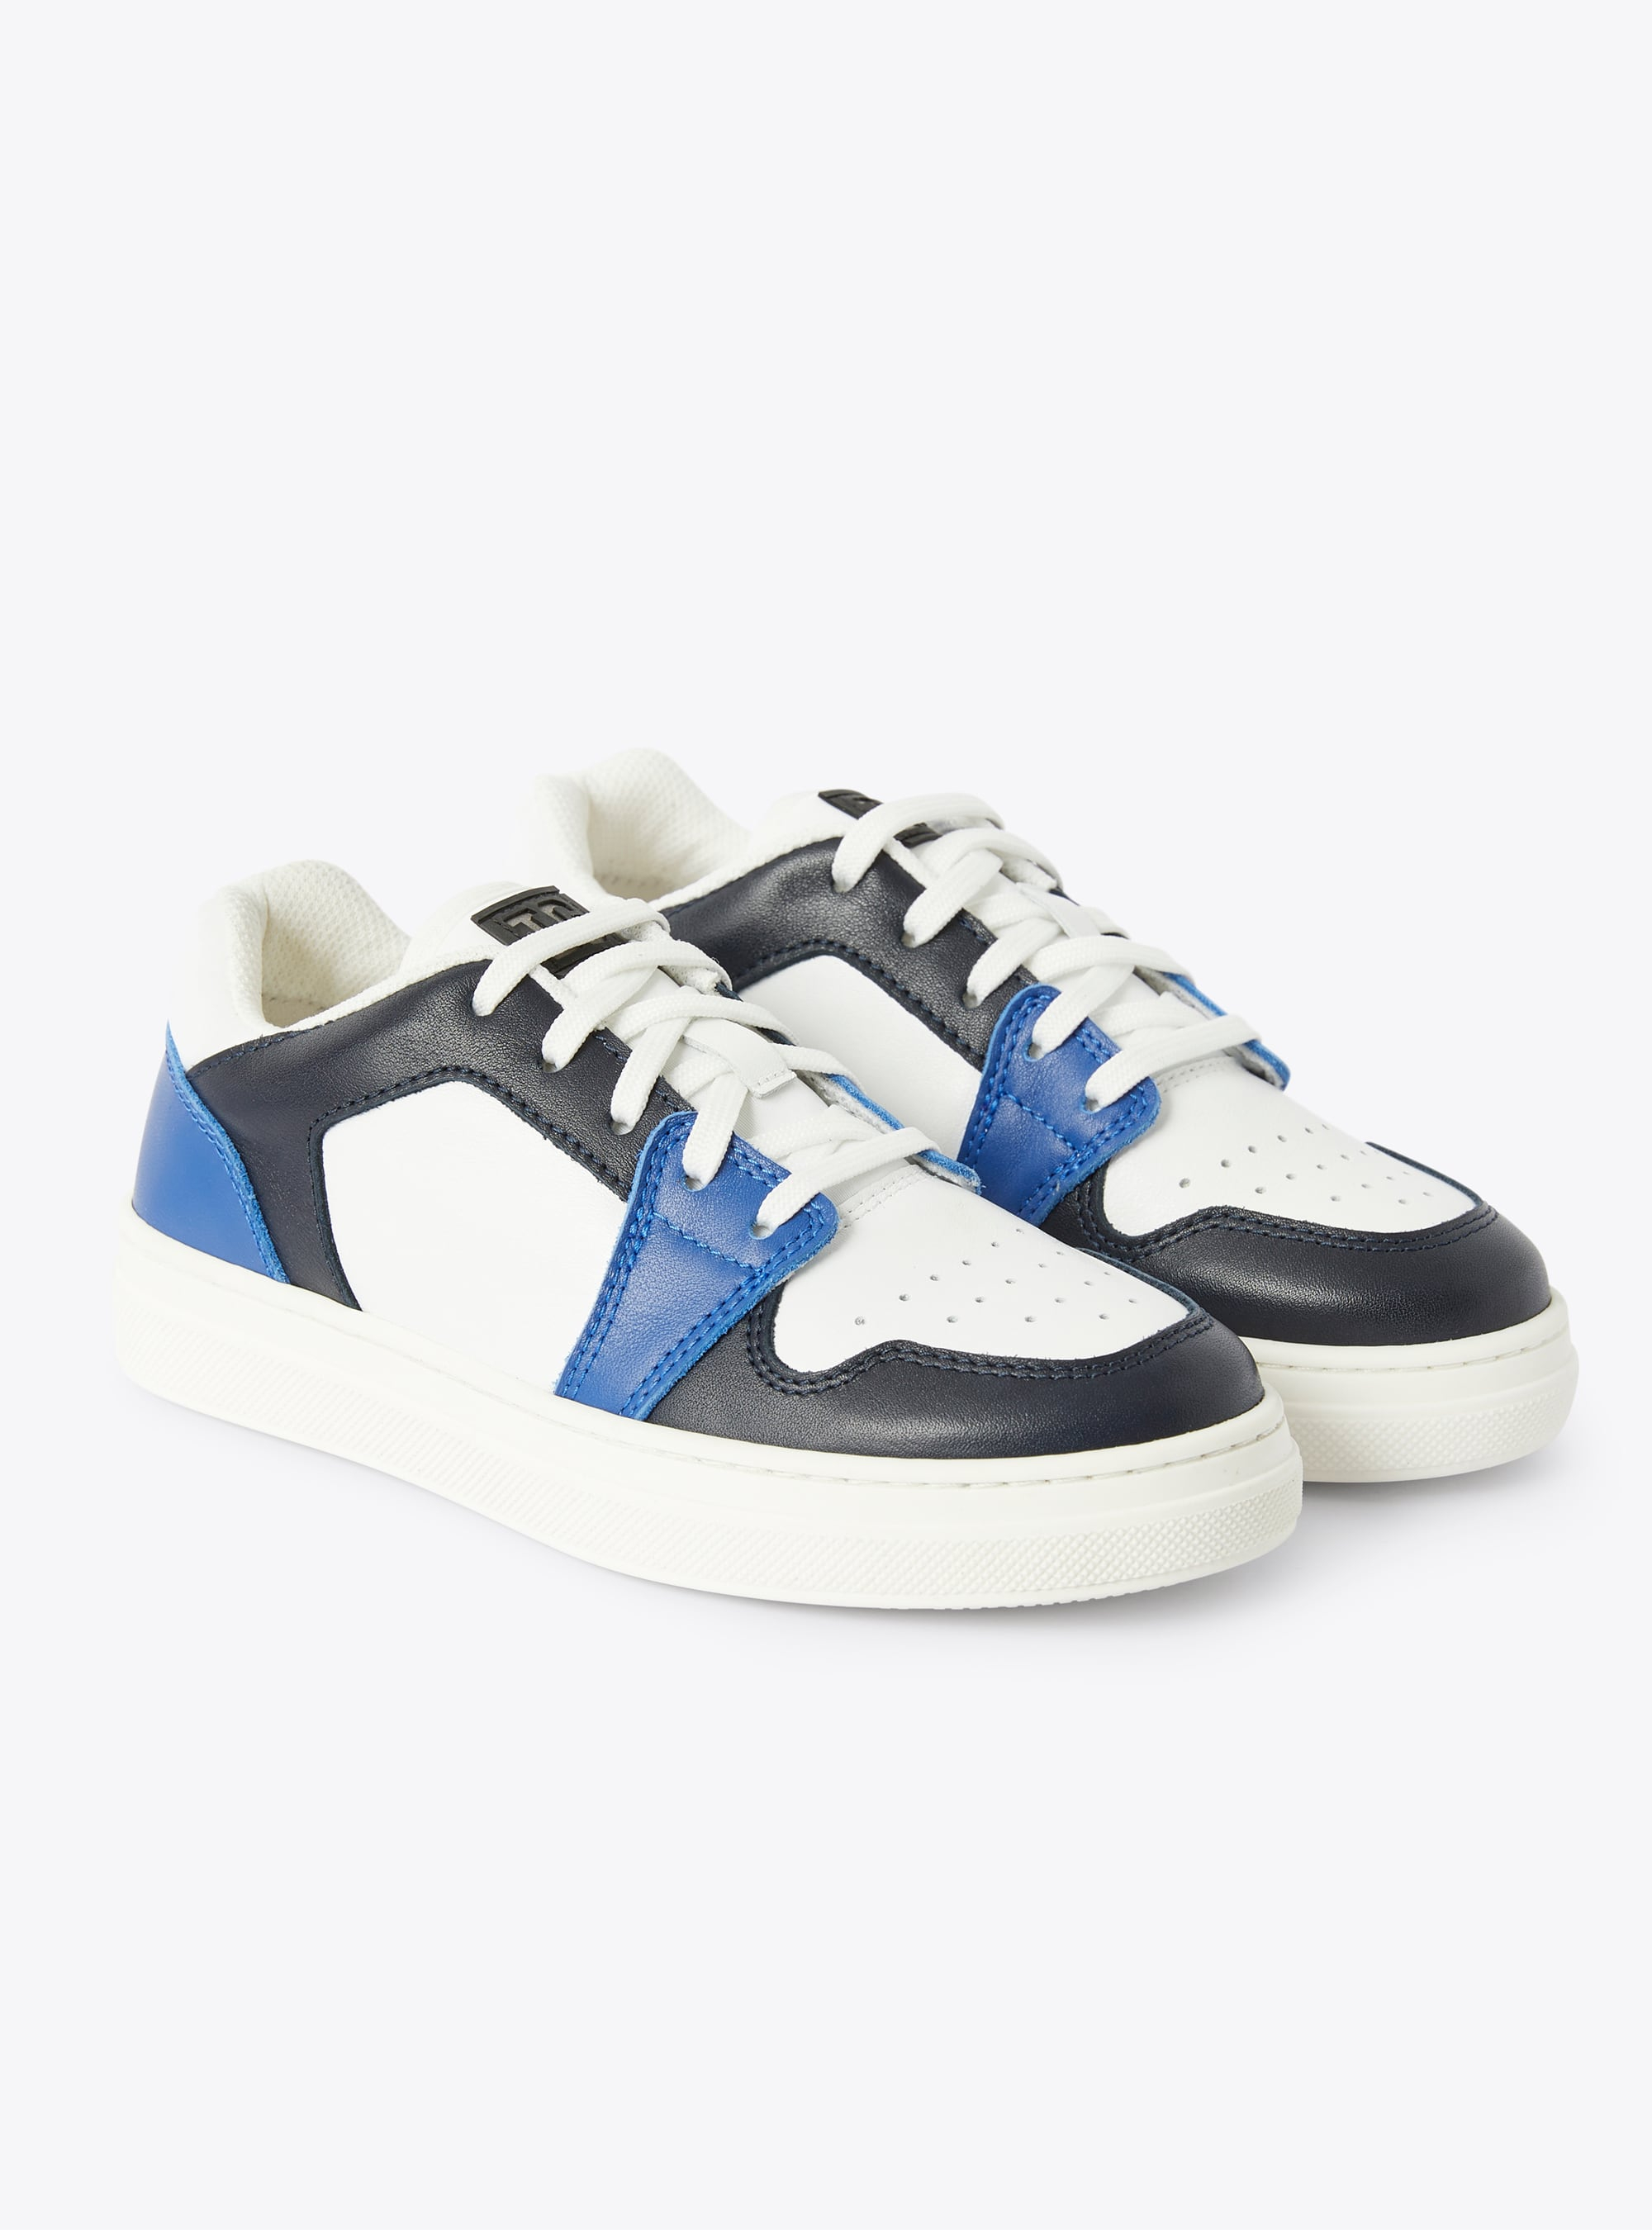 Low-top two-tone IG sneaker in cobalt and dark blue - Blue | Il Gufo